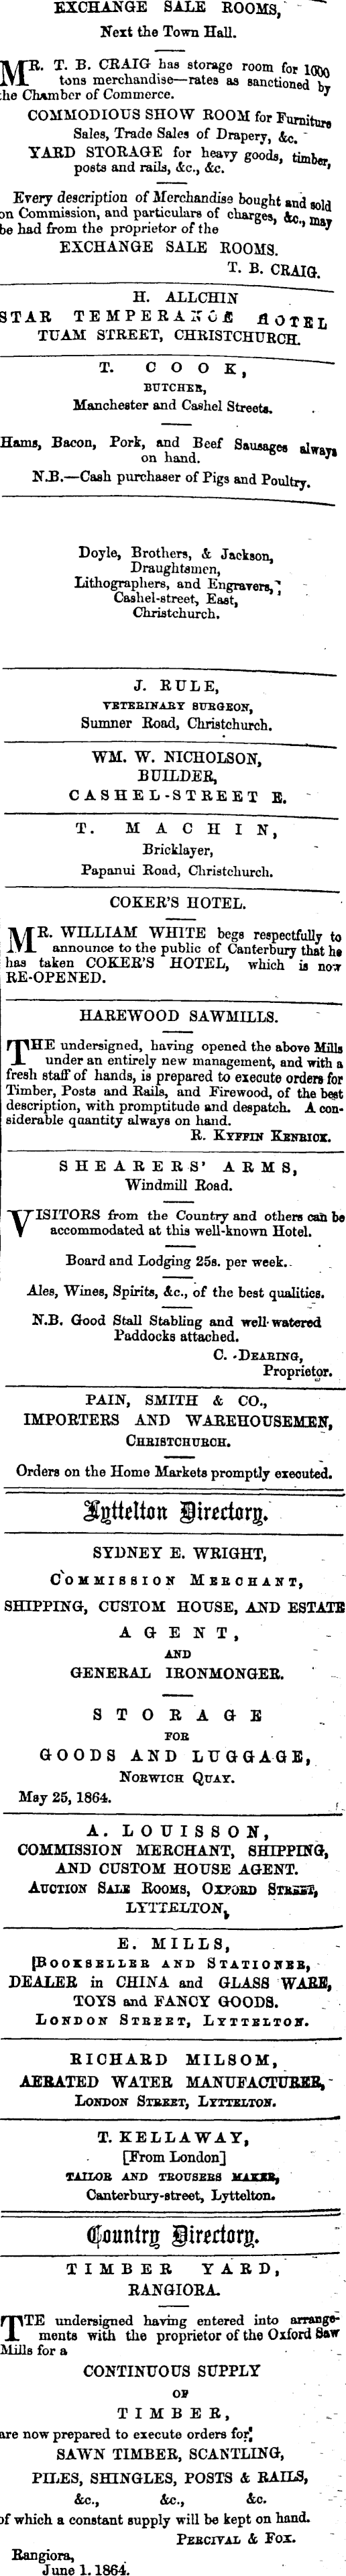 Papers Past Newspapers Press 12 July 1864 Page 4 Advertisements Column 6